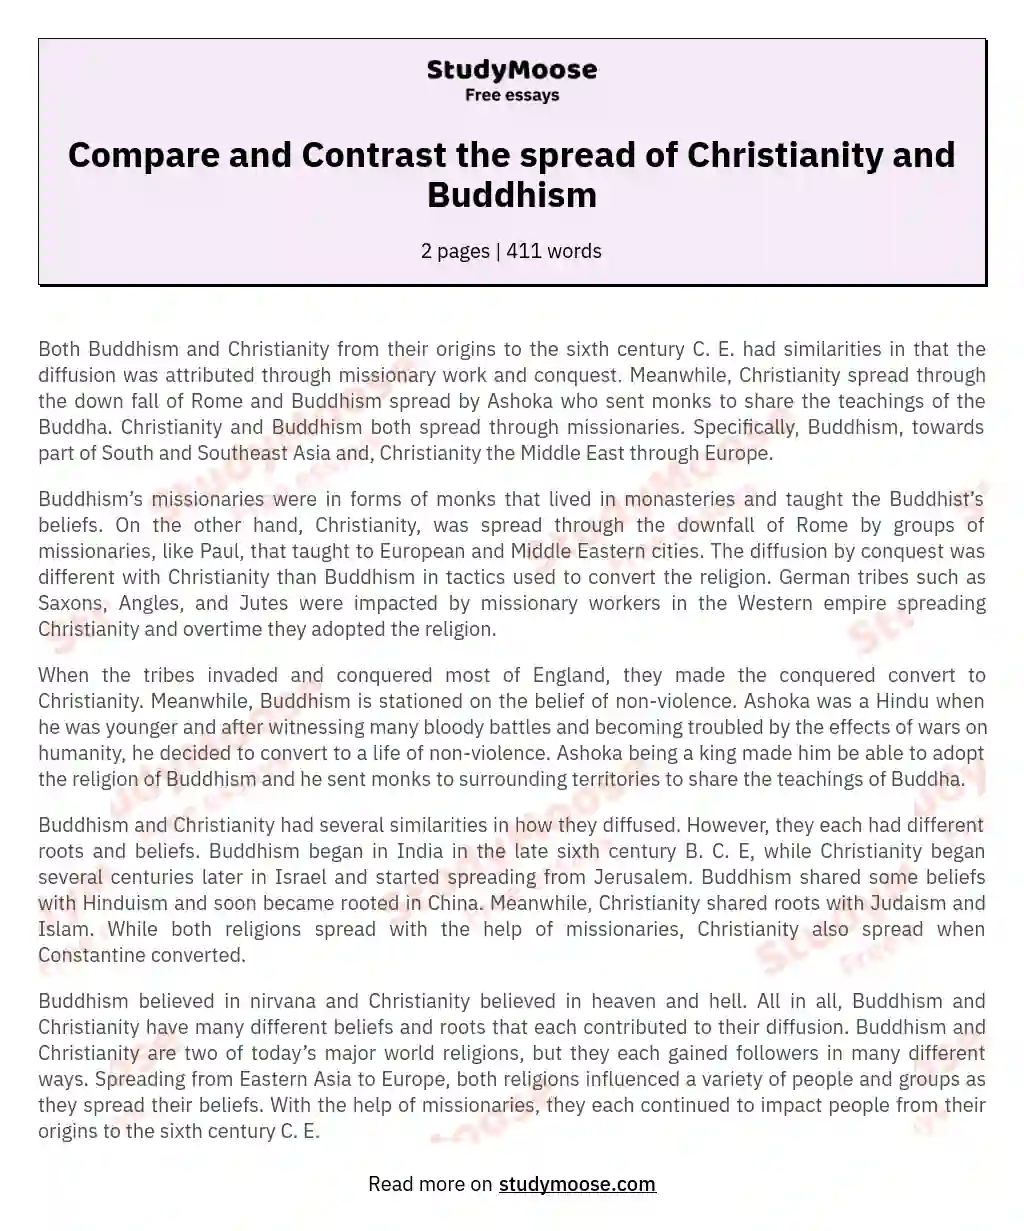 Compare and Contrast the spread of Christianity and Buddhism essay